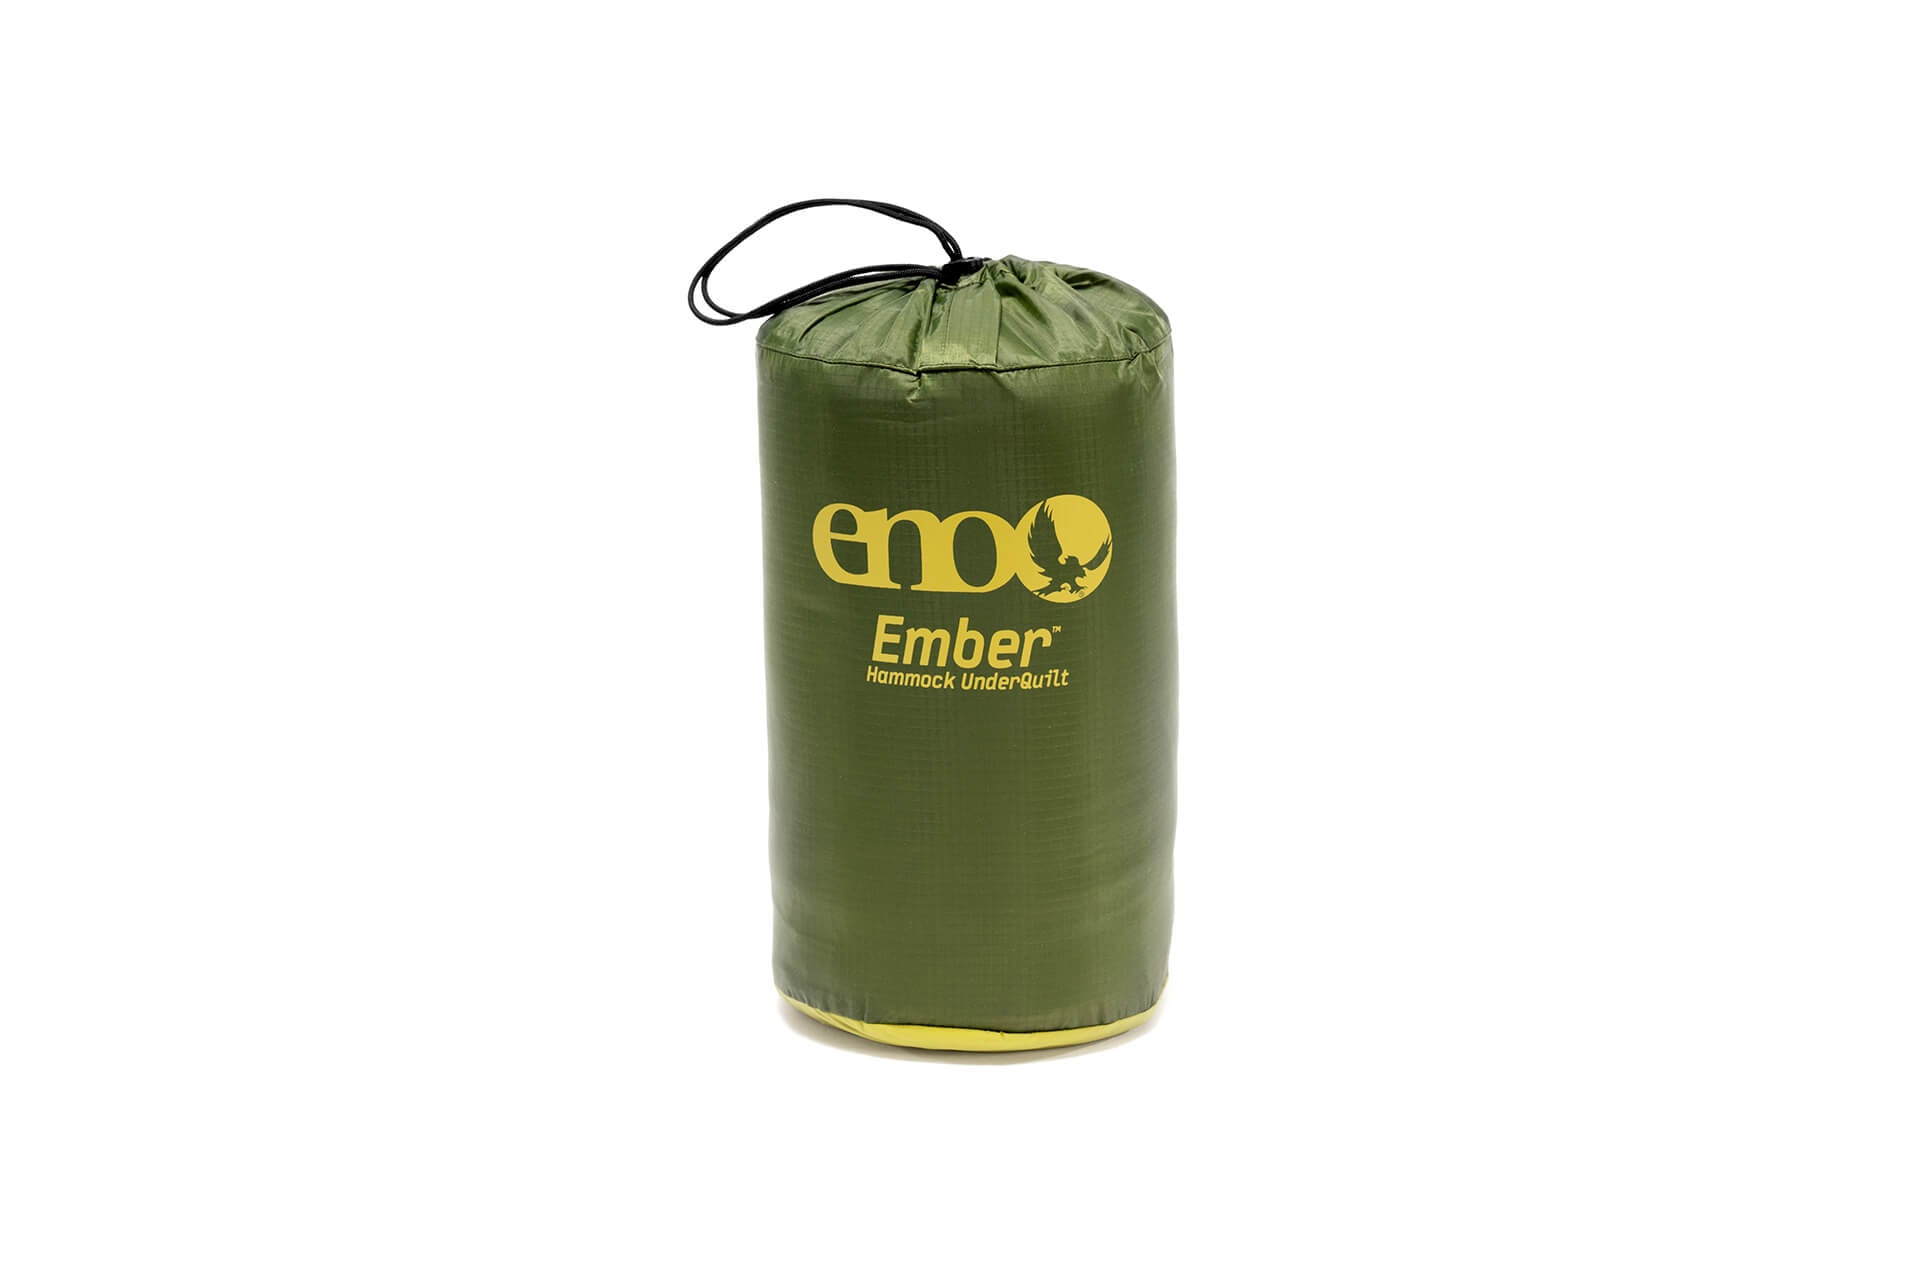 Eagles Nest Outfitters, Inc. Insulation Ember™ UnderQuilt